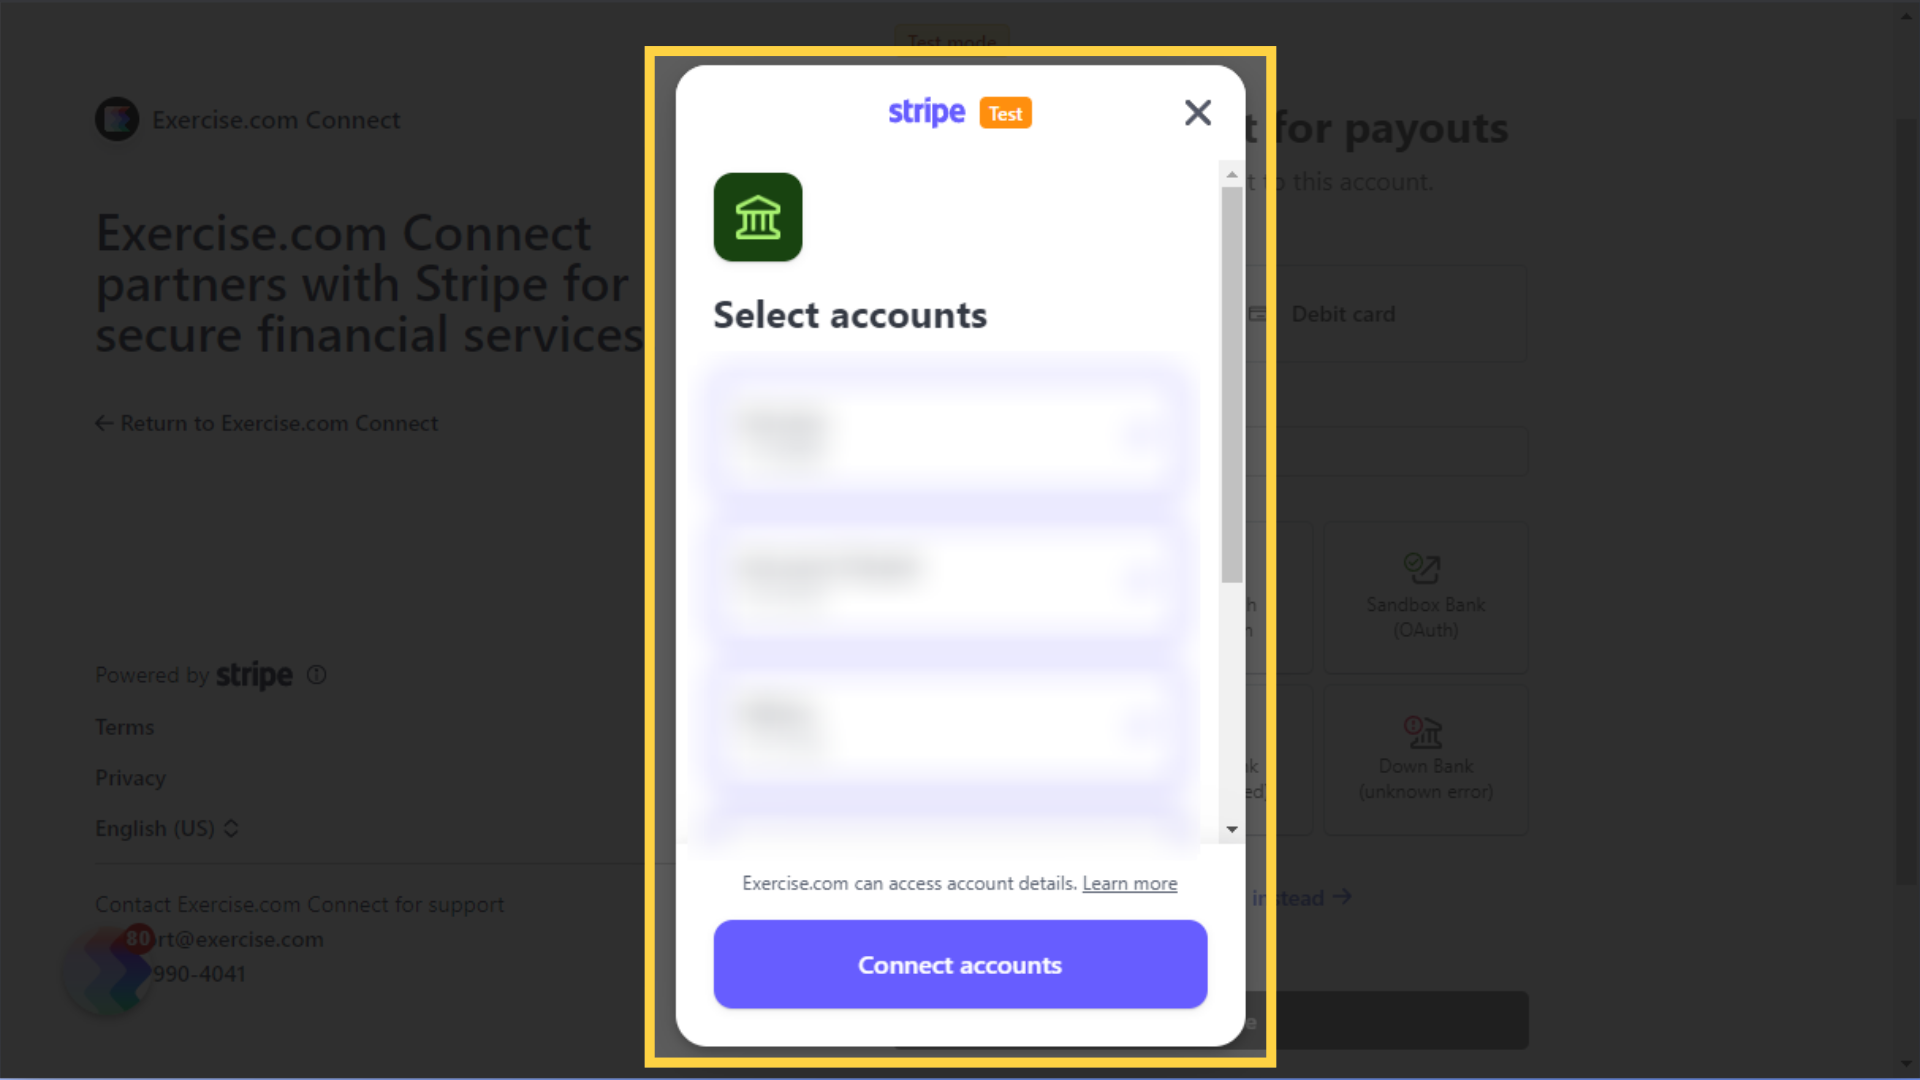 Select the account where you want to receive payouts.